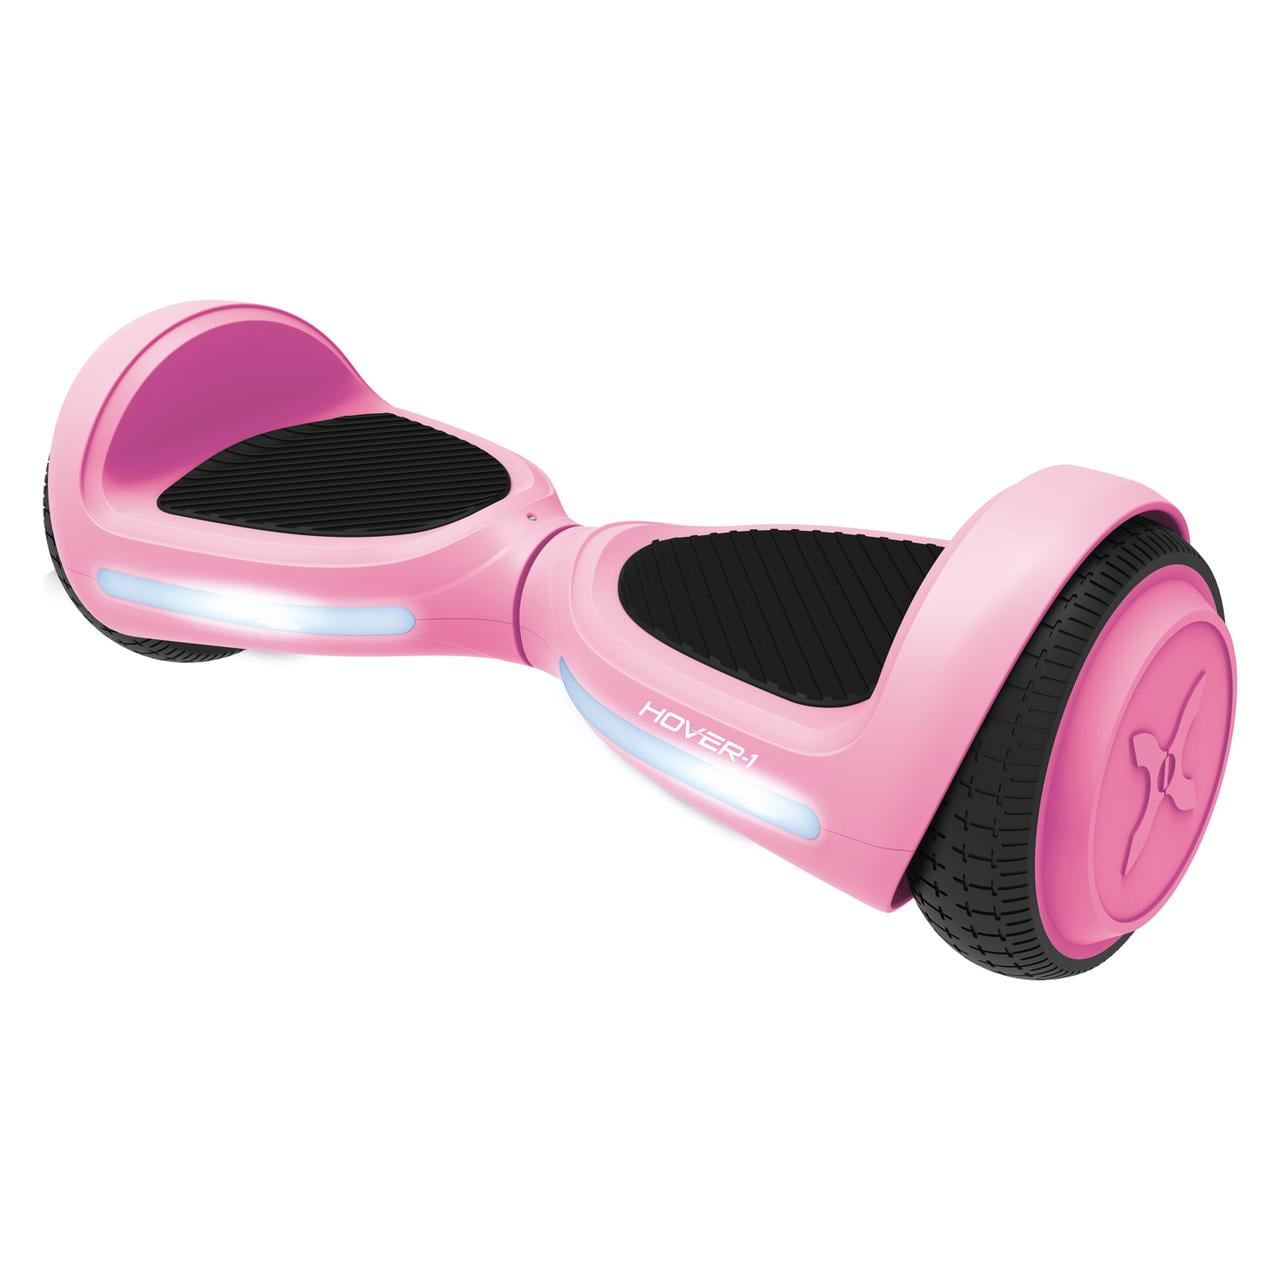 Hover-1 My First Hoverboard Kids Hoverboard w/ LED Headlights, 5 MPH Max Speed, 80 lbs Max Weight, 3 Miles Max Distance - Pink